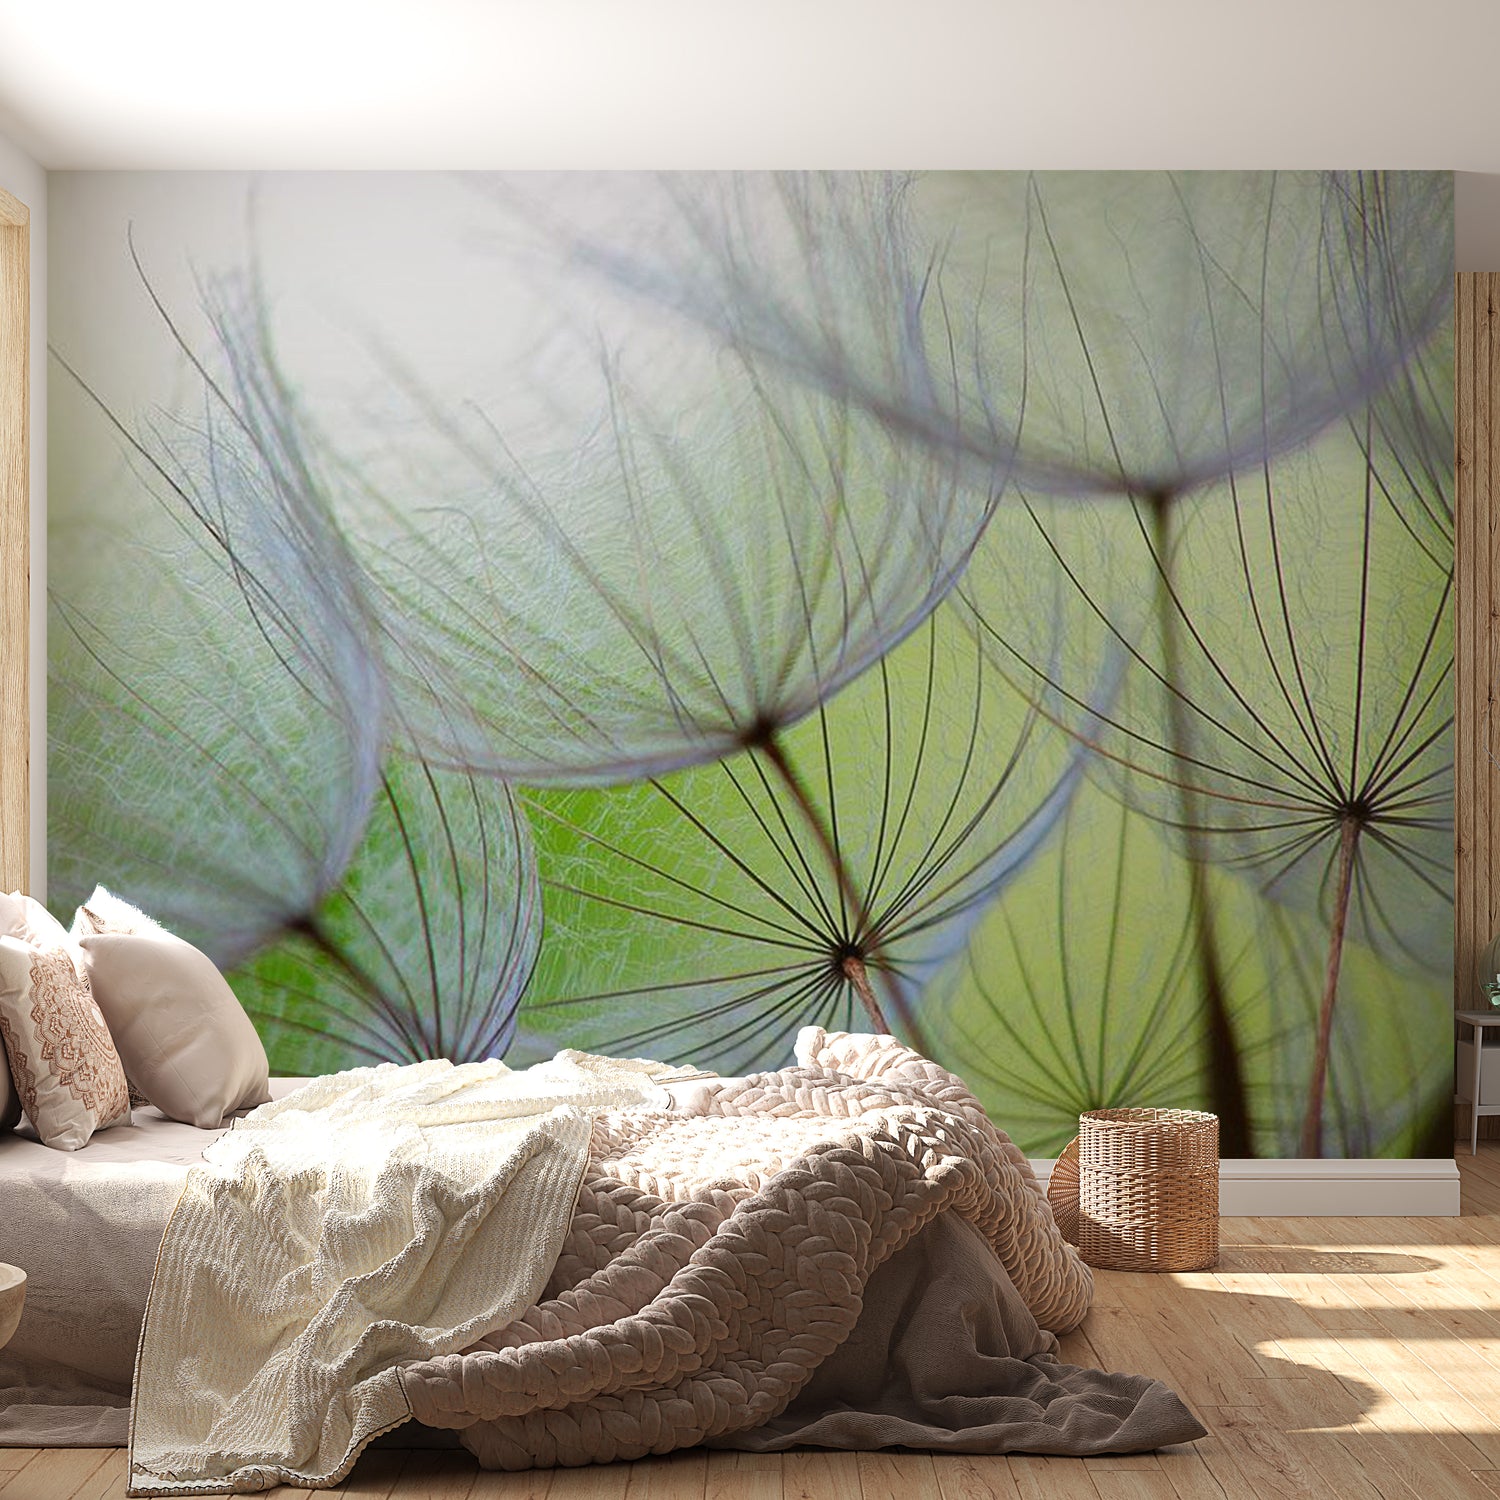 Peel & Stick Floral Wall Mural - Dandelions Closeup - Removable Wall Decals